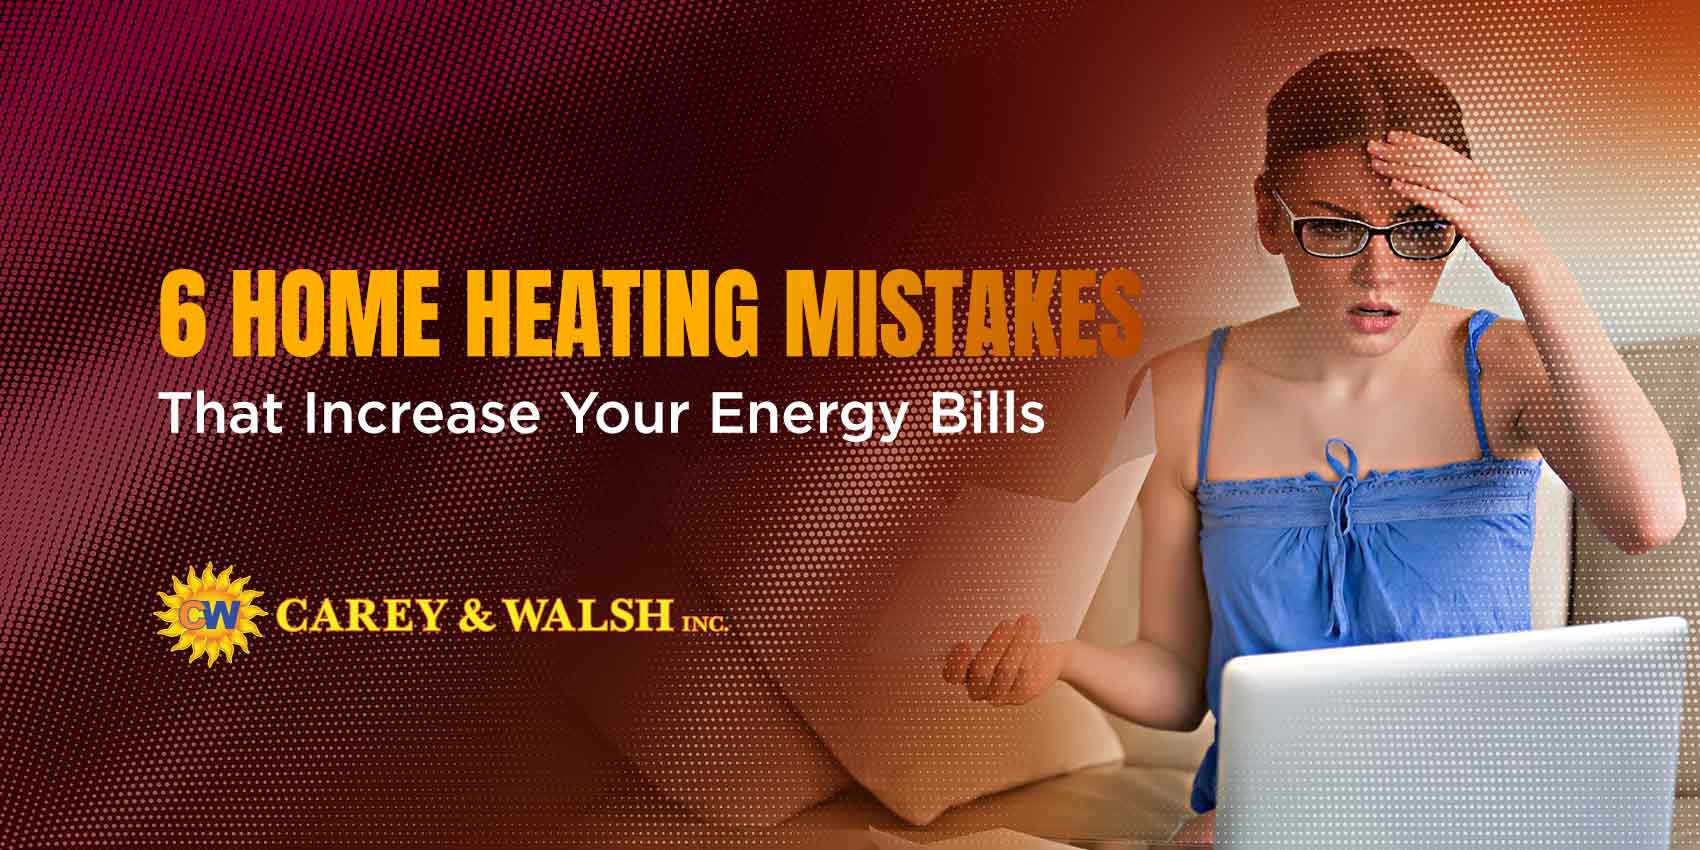 6 Home Heating Mistakes That Increase Your Energy Bills